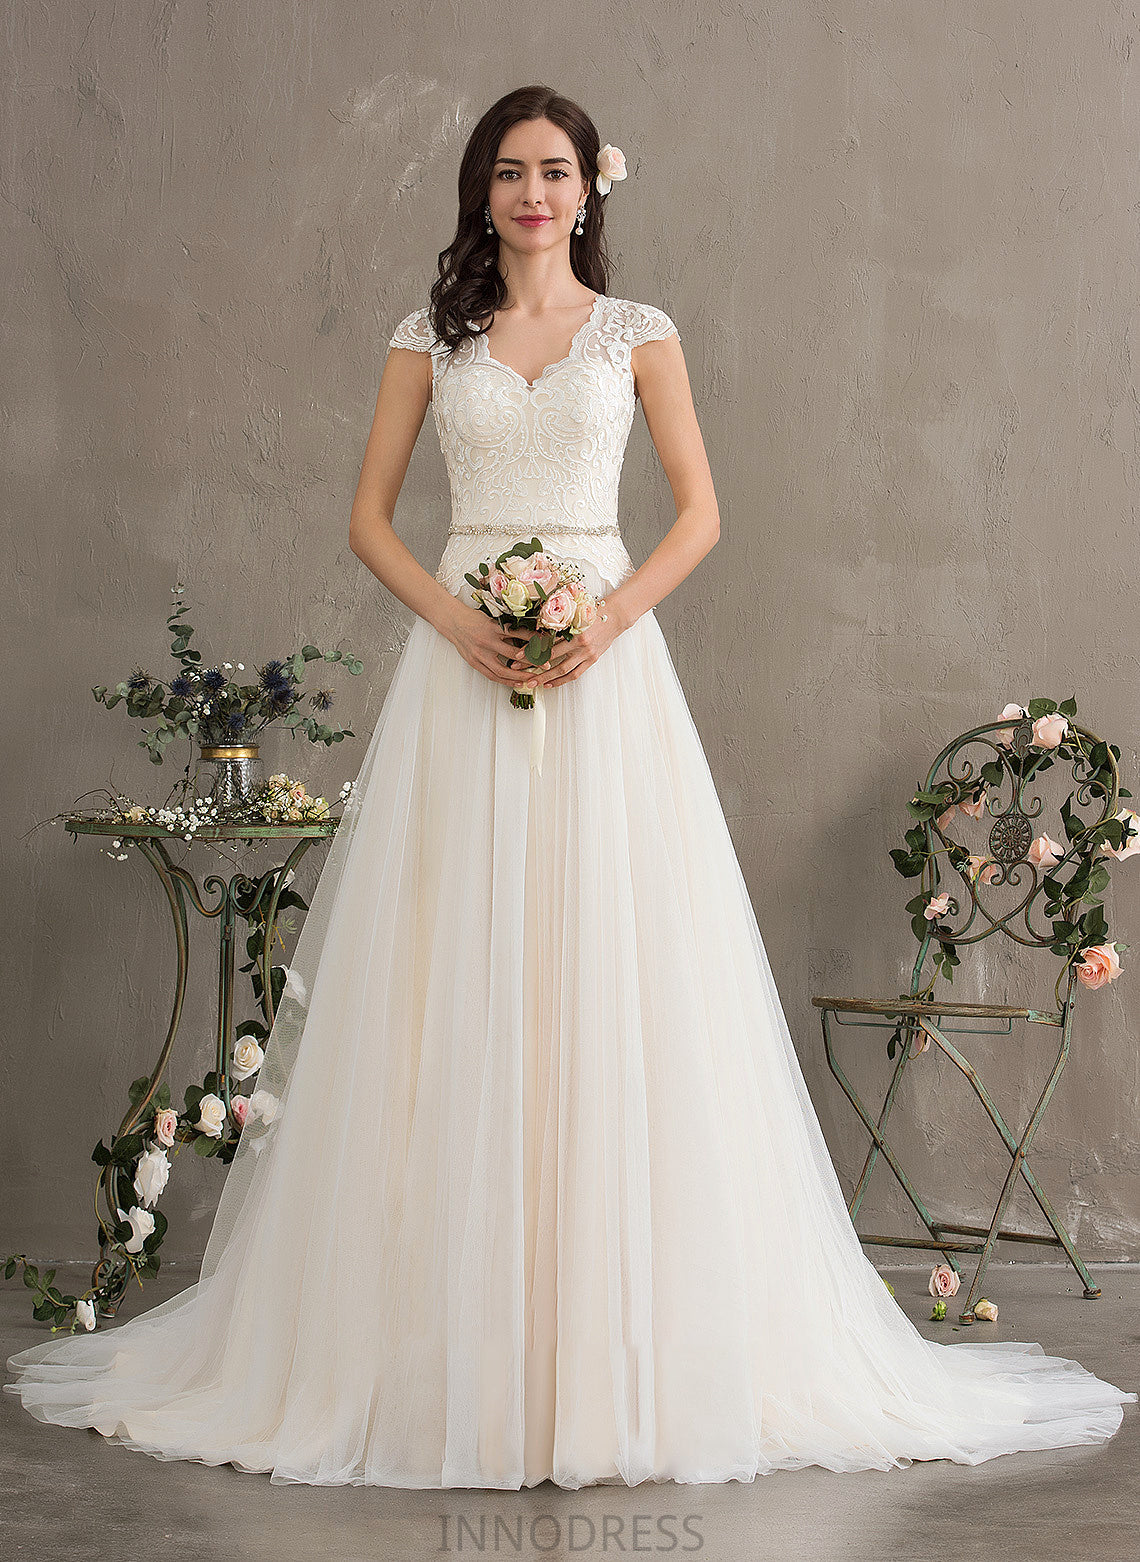 Wedding Tulle With Court Ball-Gown/Princess Zaniyah Sequins Dress Beading Wedding Dresses V-neck Train